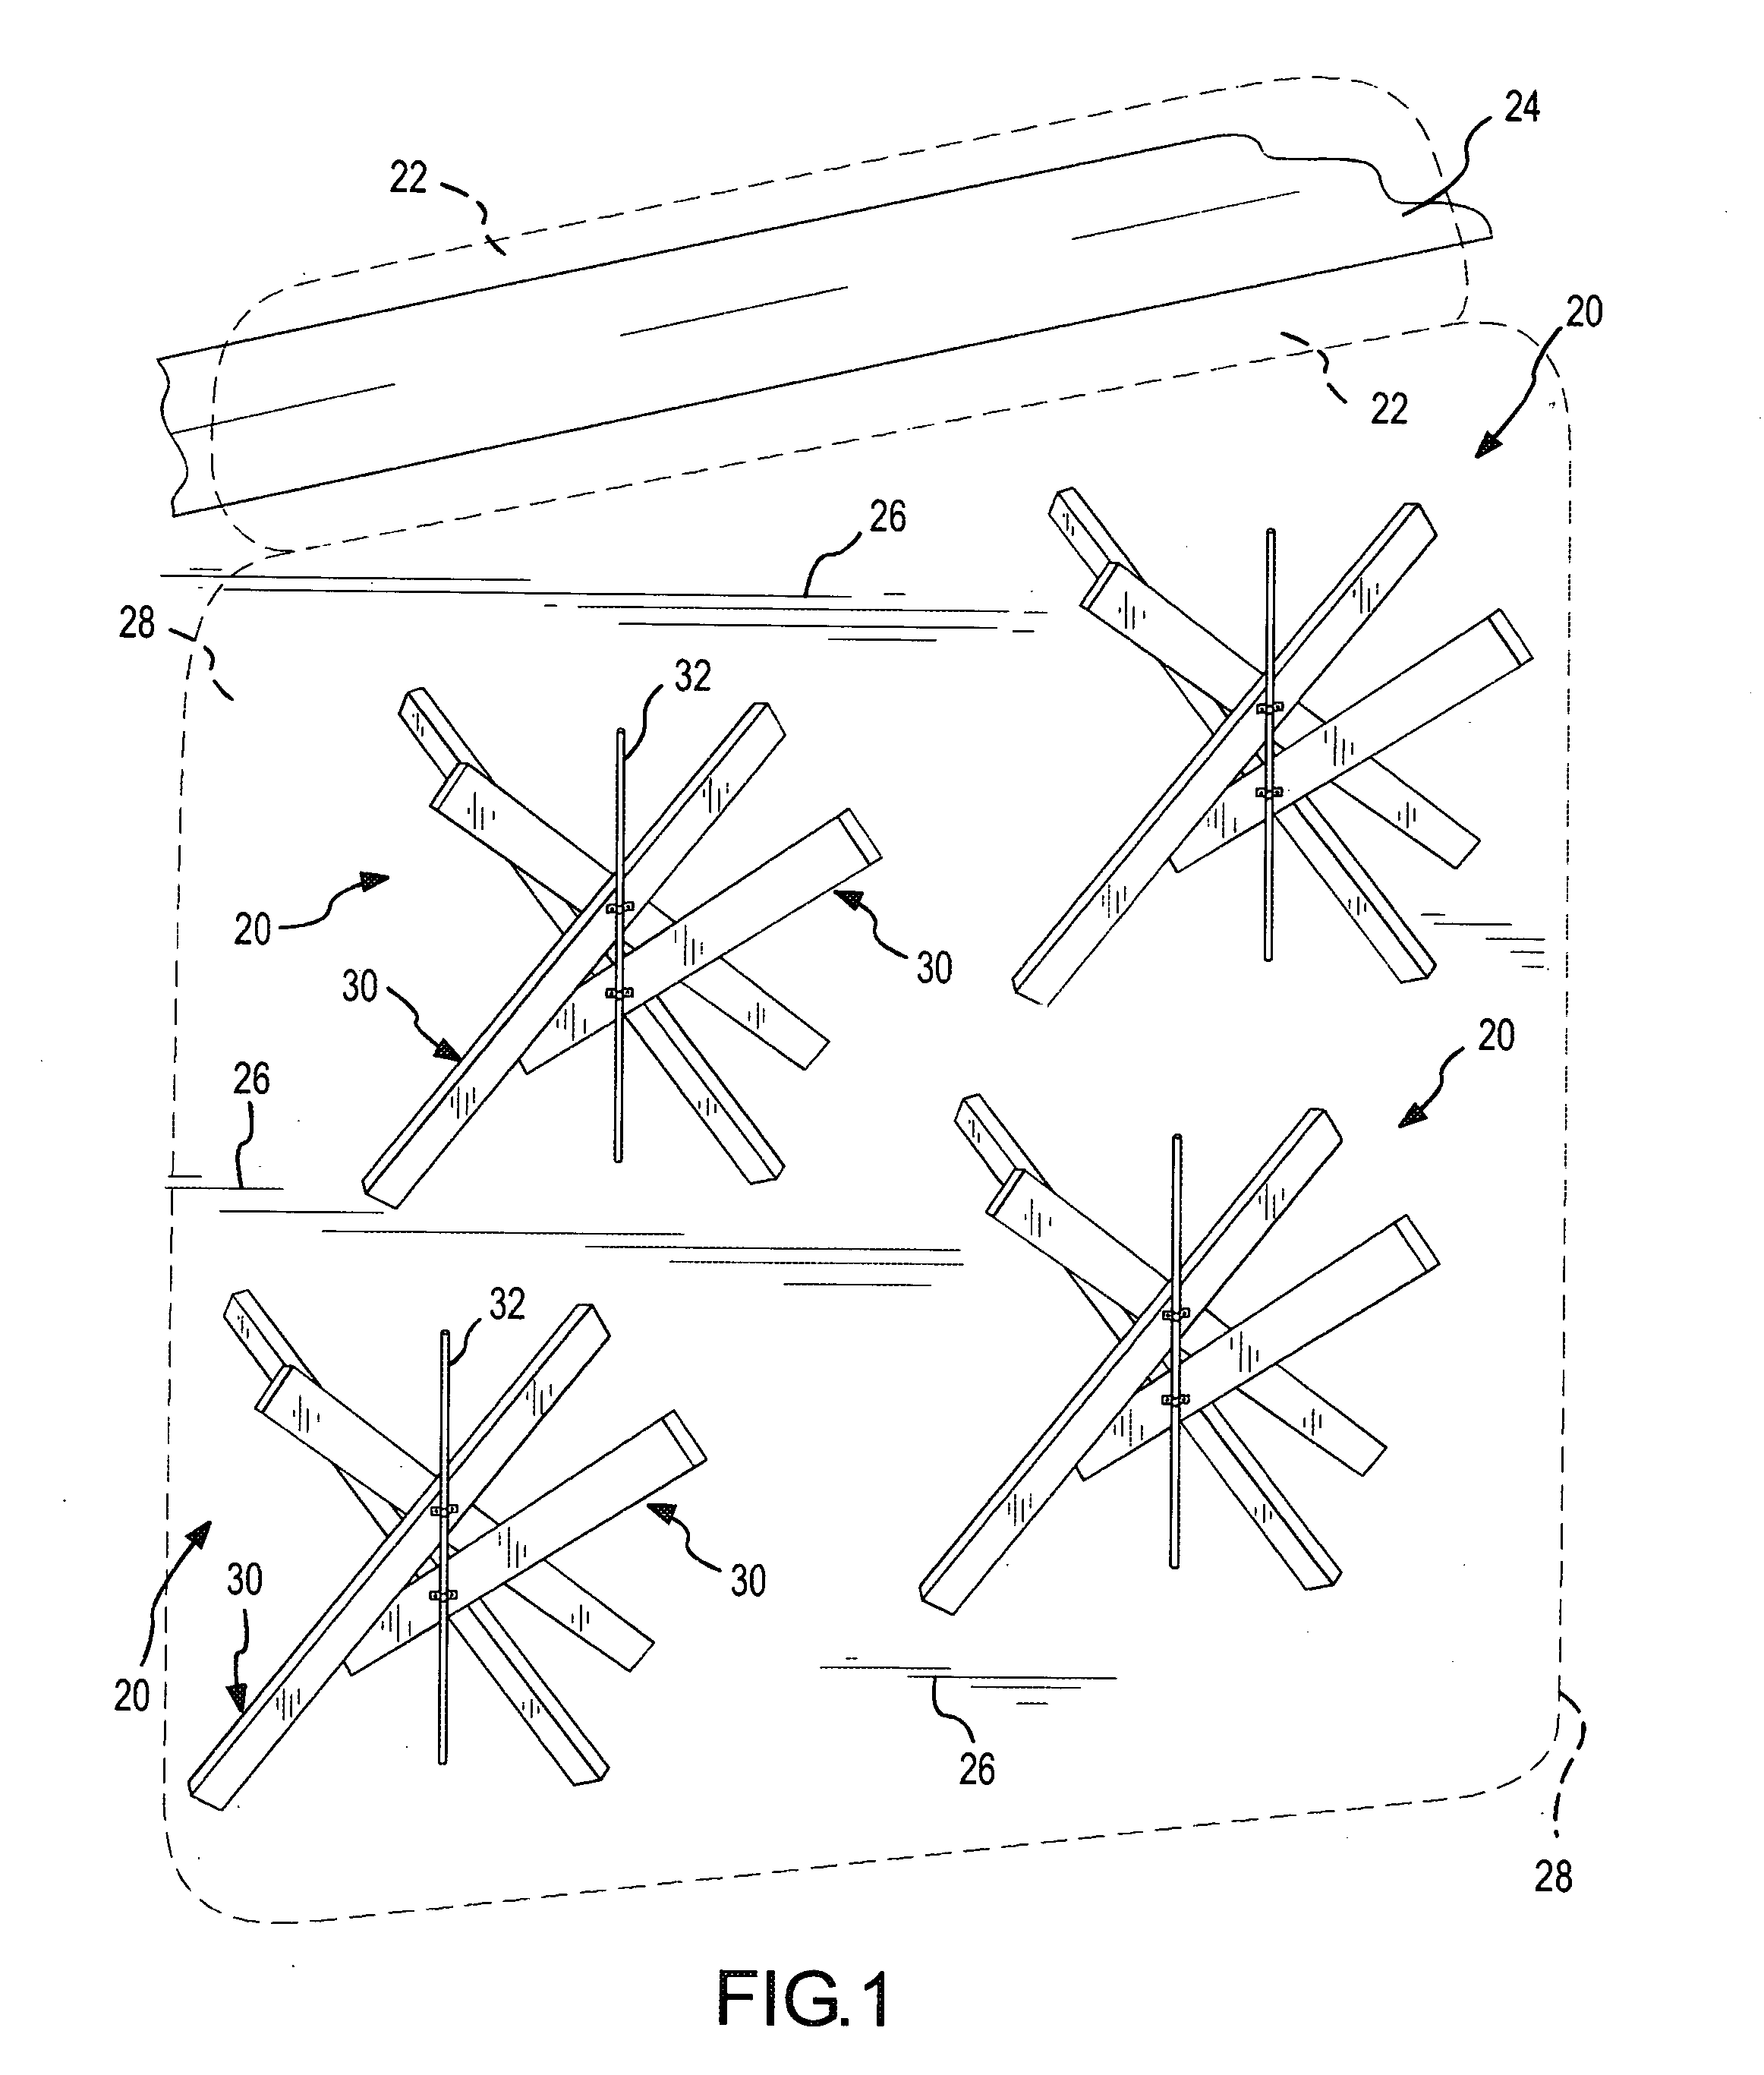 Tetrapod control device and method for stabilizing, depositing and retaining windblown particles